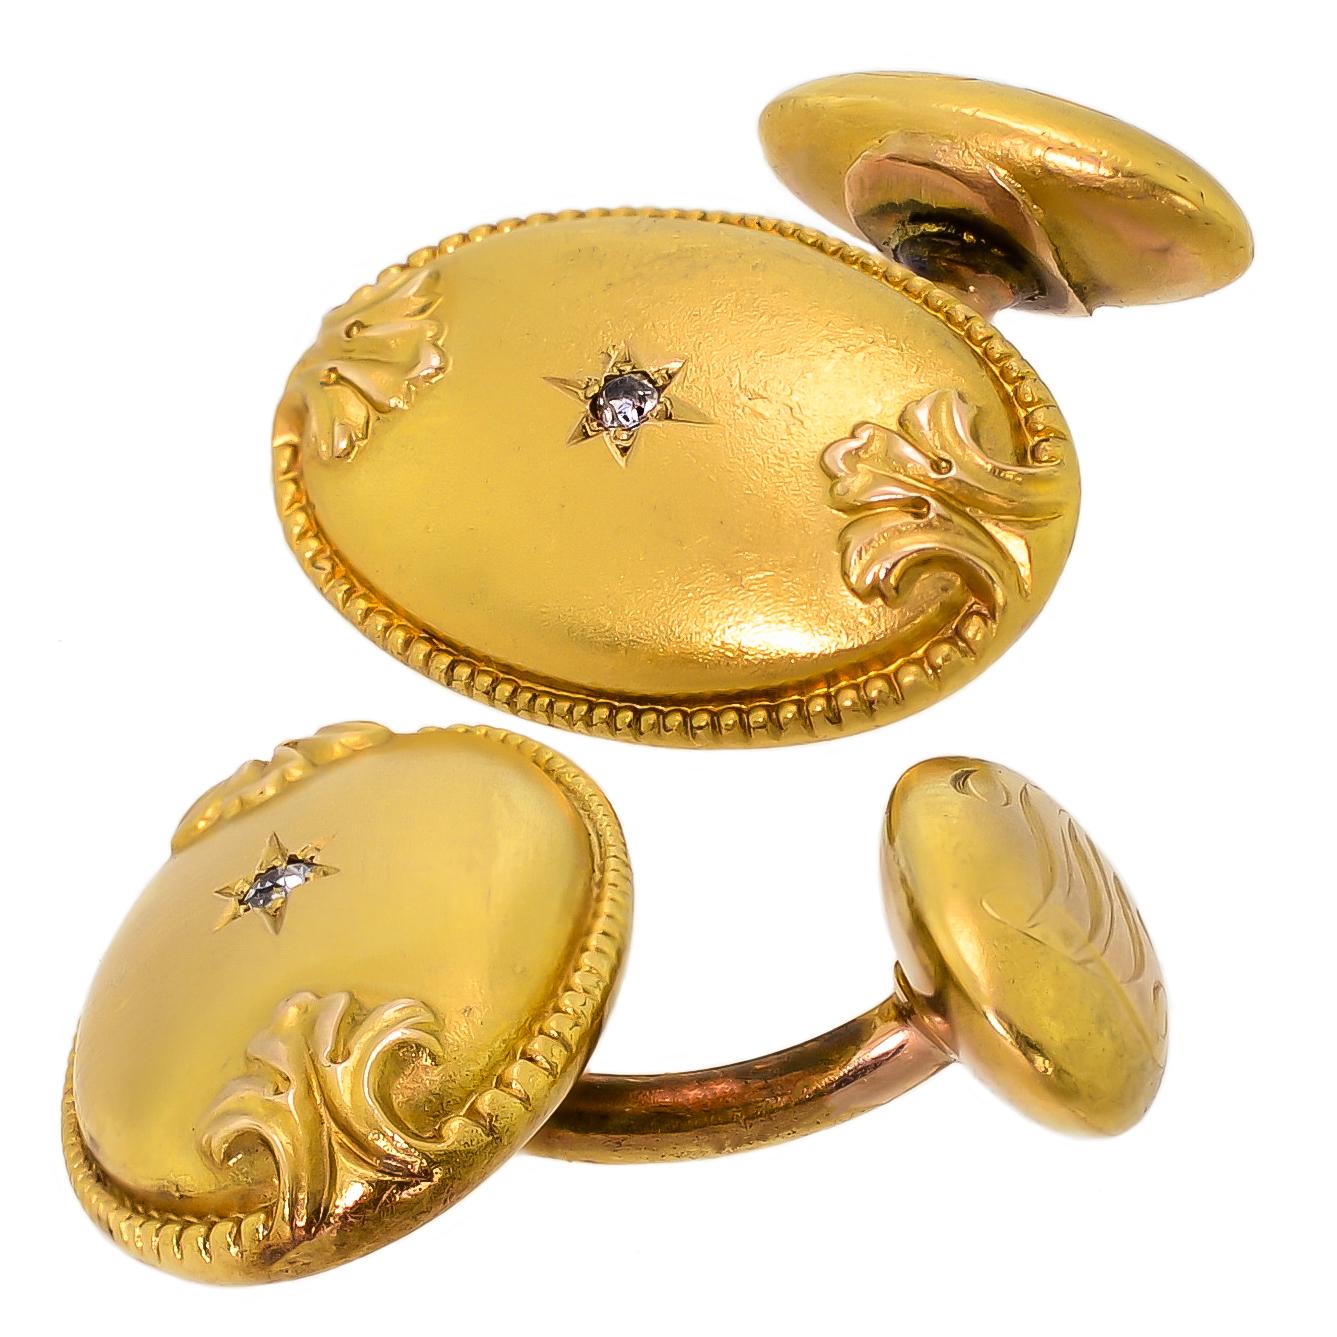 These exquisite oval Victorian 18k yellow gold and diamond cufflinks are handsome, tailored and exhibit elegance, style, and confidence with its simple design. The oval textured front is decorated with a rippled border that leads into an organic